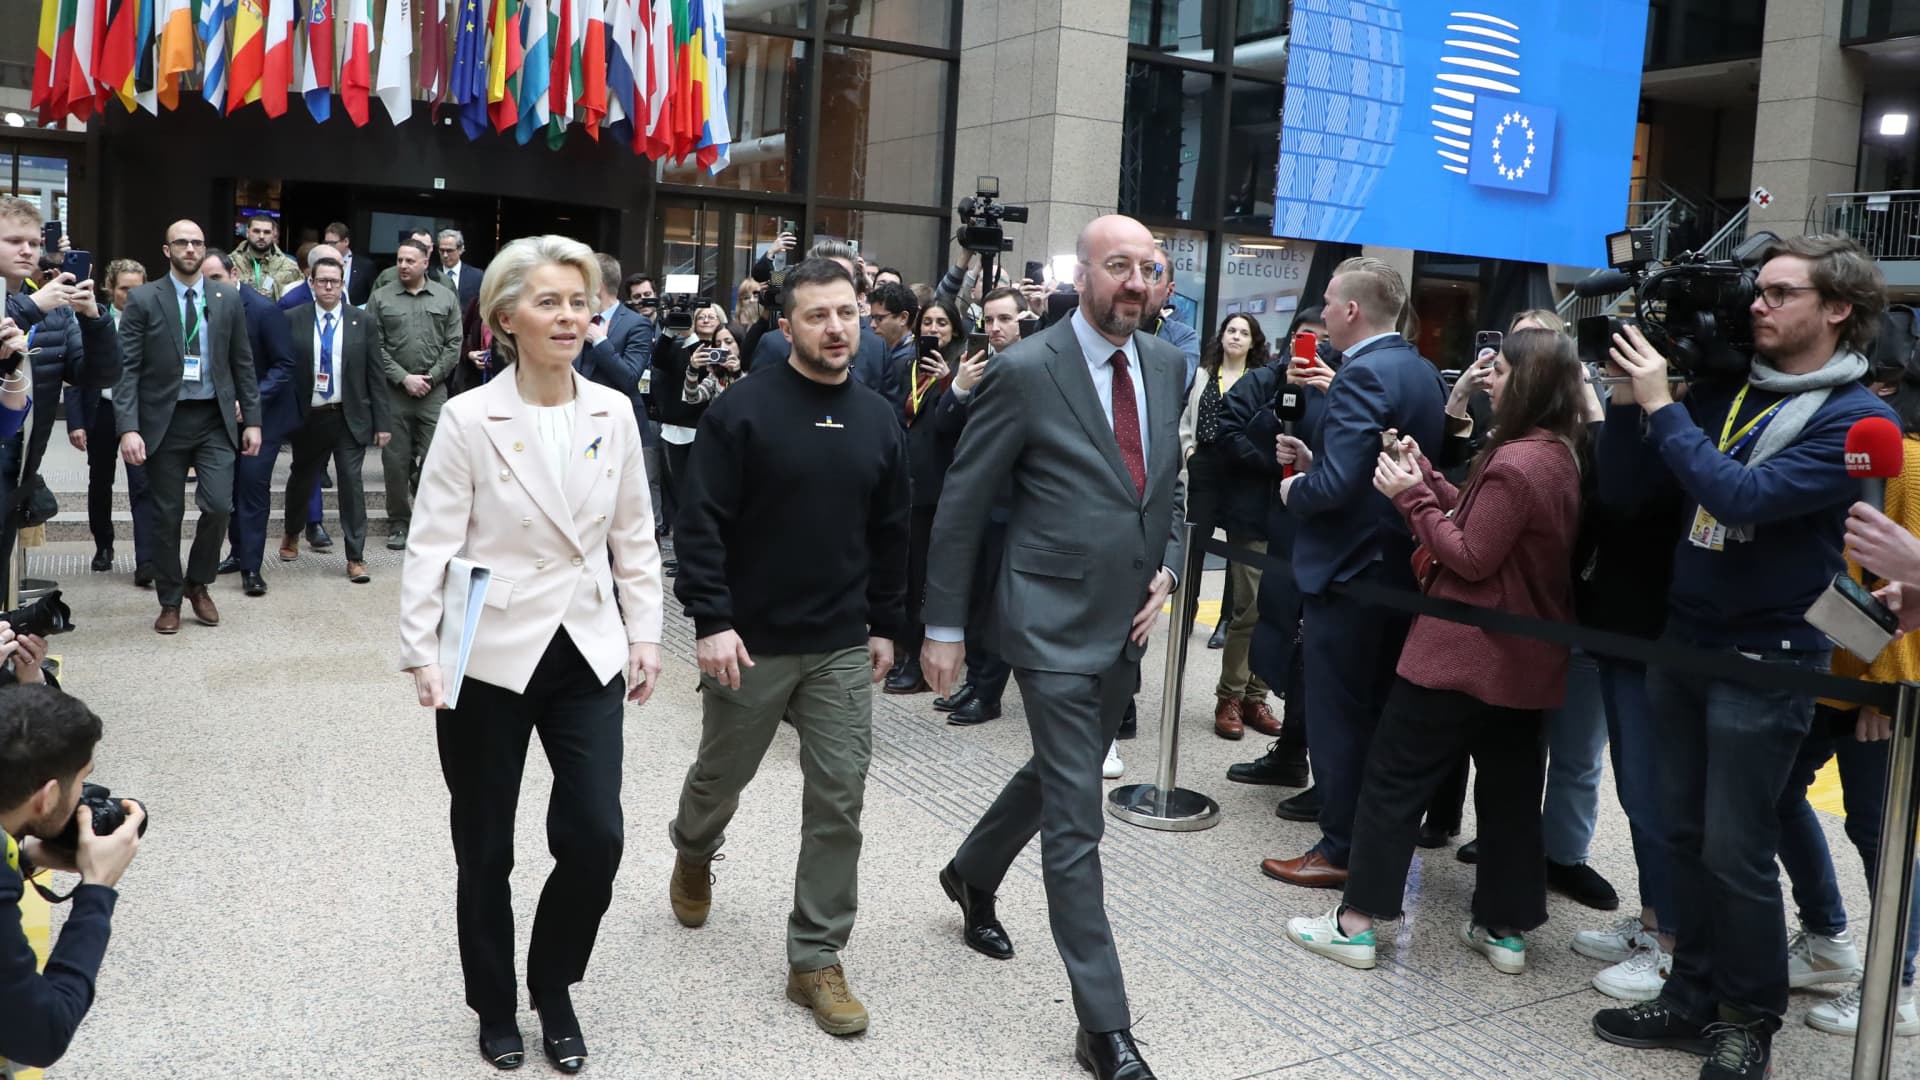 European Commission President Ursula Von der Leyen, Ukraine president Volodymyr Zelensky and European Council President Charles Michel pictured at a Special European council summit, in Brussels, Thursday 09 February 2023.